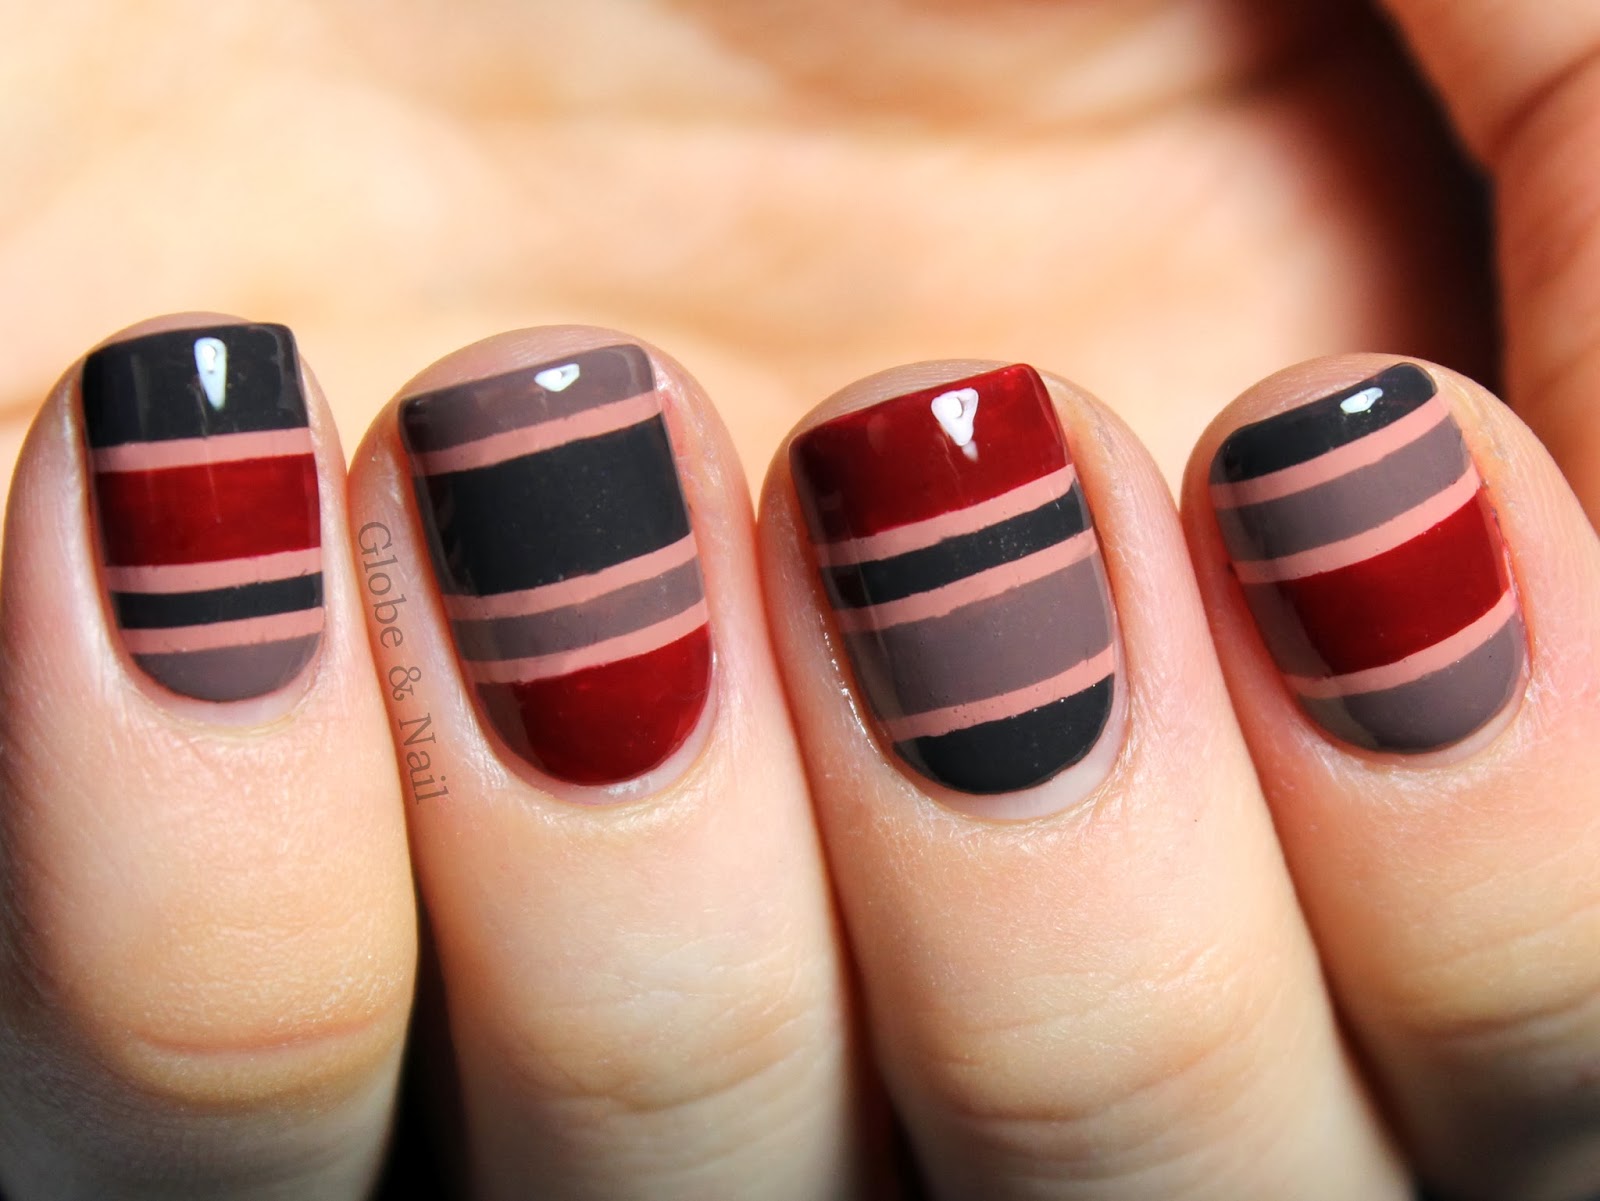 10. "Black and White Striped Nail Art for Summer" - wide 6